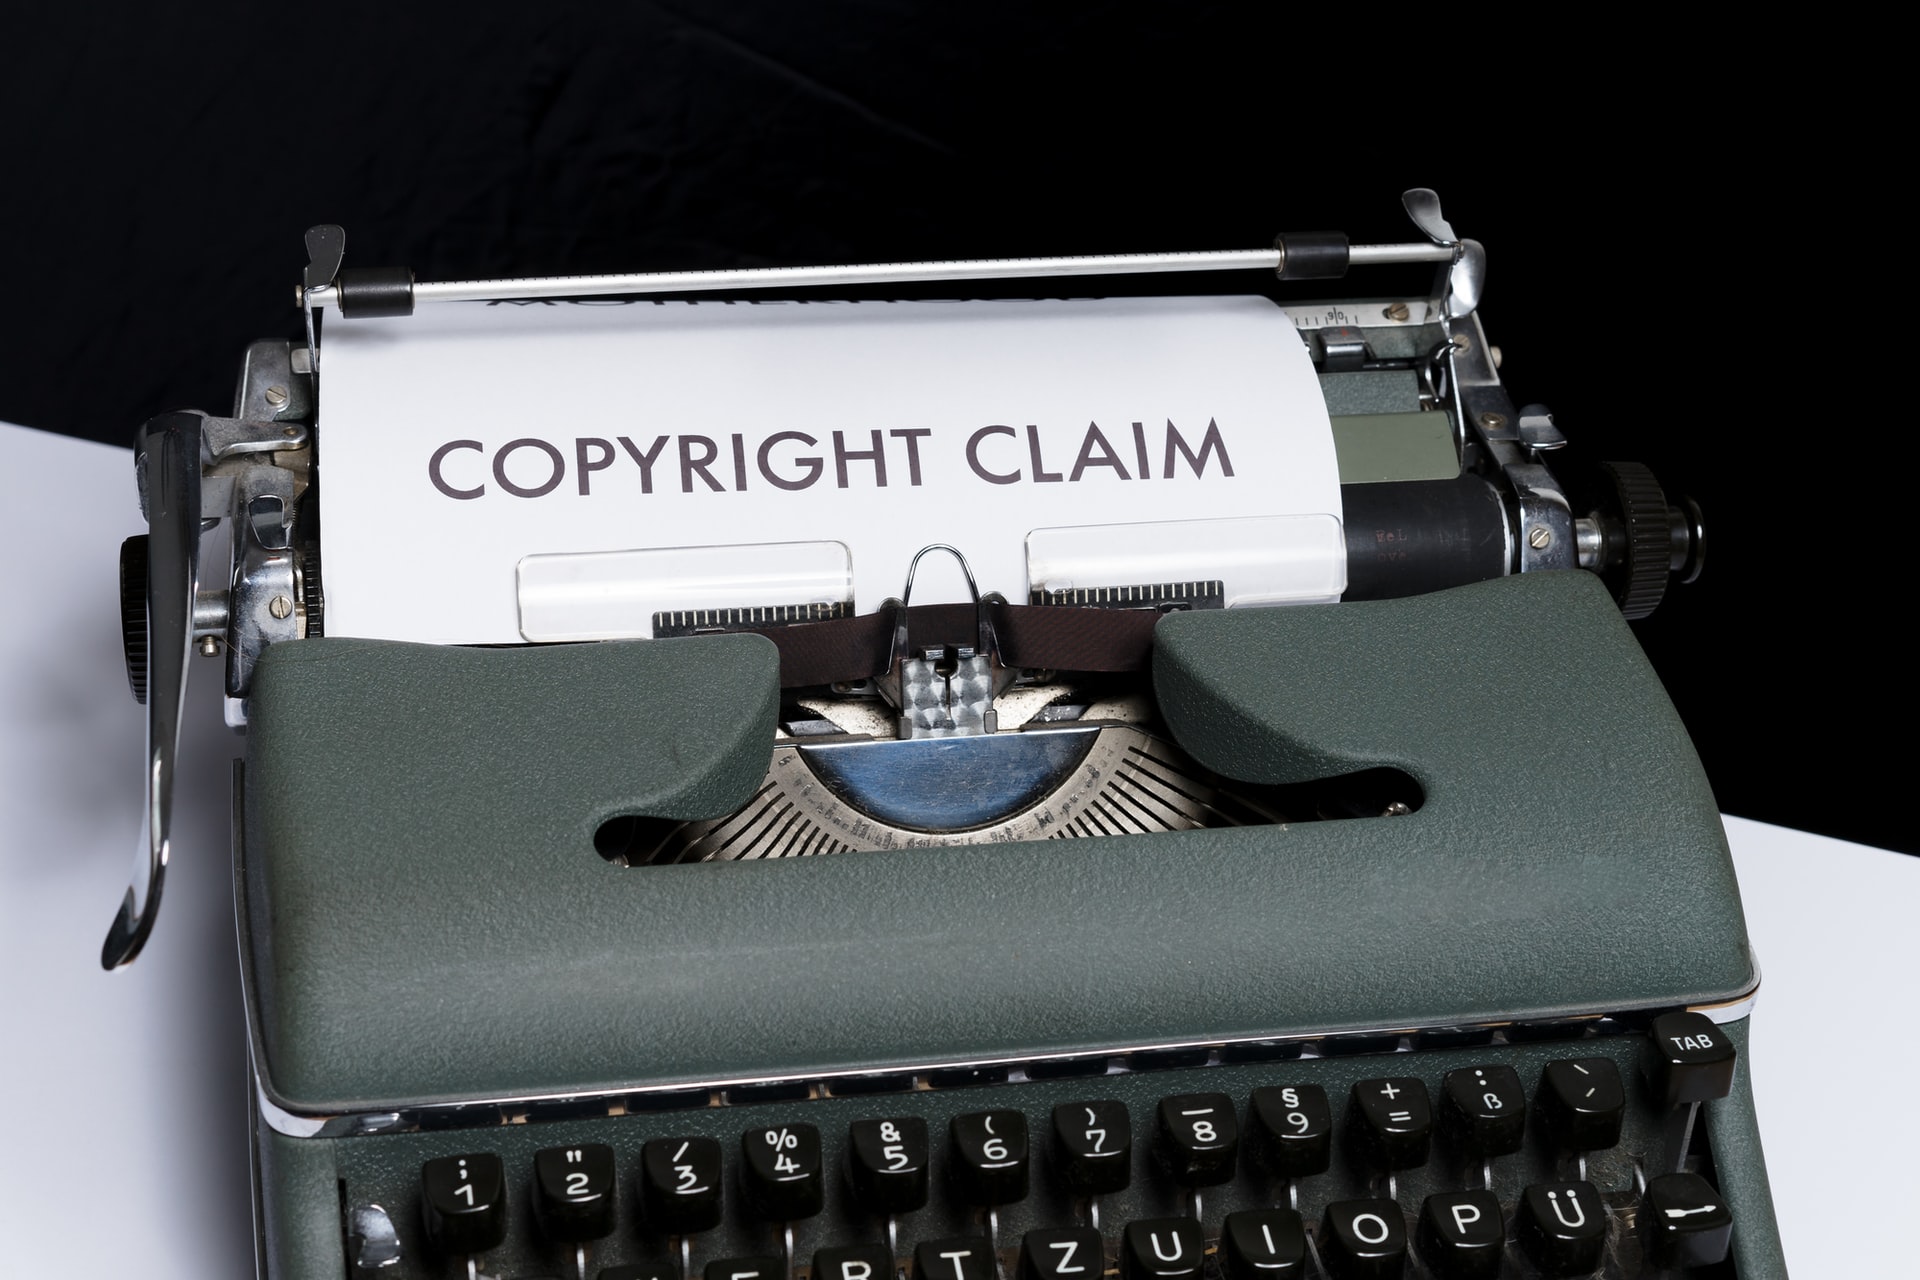 Copyright infringement under the Copyright Act 1968 (Cth) occurs when a person, directly or indirectly, does something with the copyrighted work which constitutes an action that is usually protected exclusively for the copyright owner, without the owner’s permission or a relevant defence.